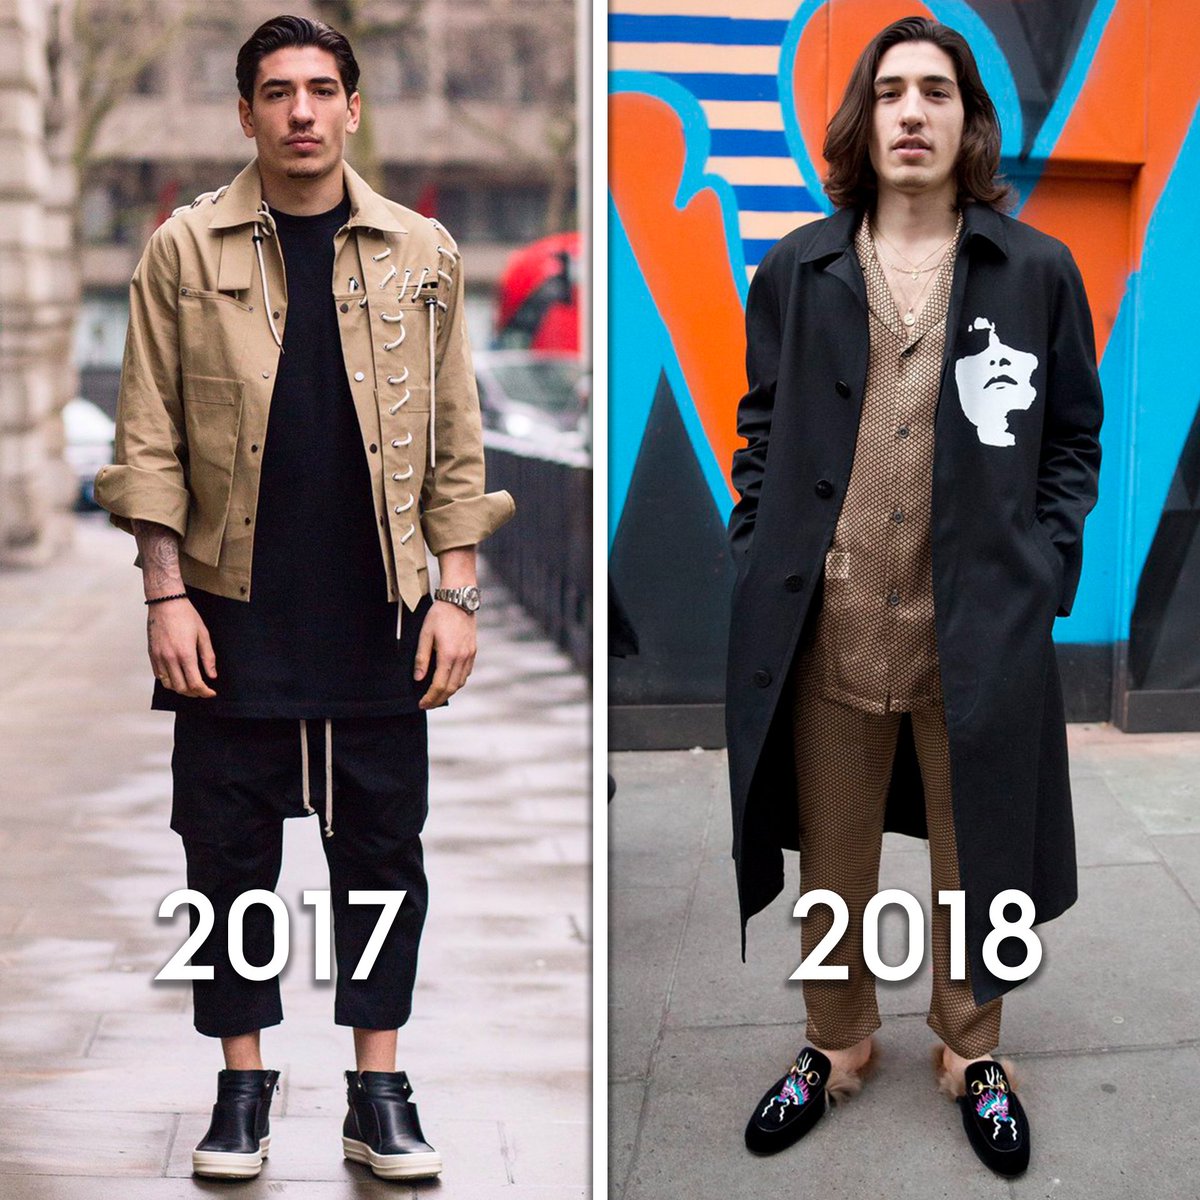 Soccer AM on X: Has Hector Bellerin's fashion improved since